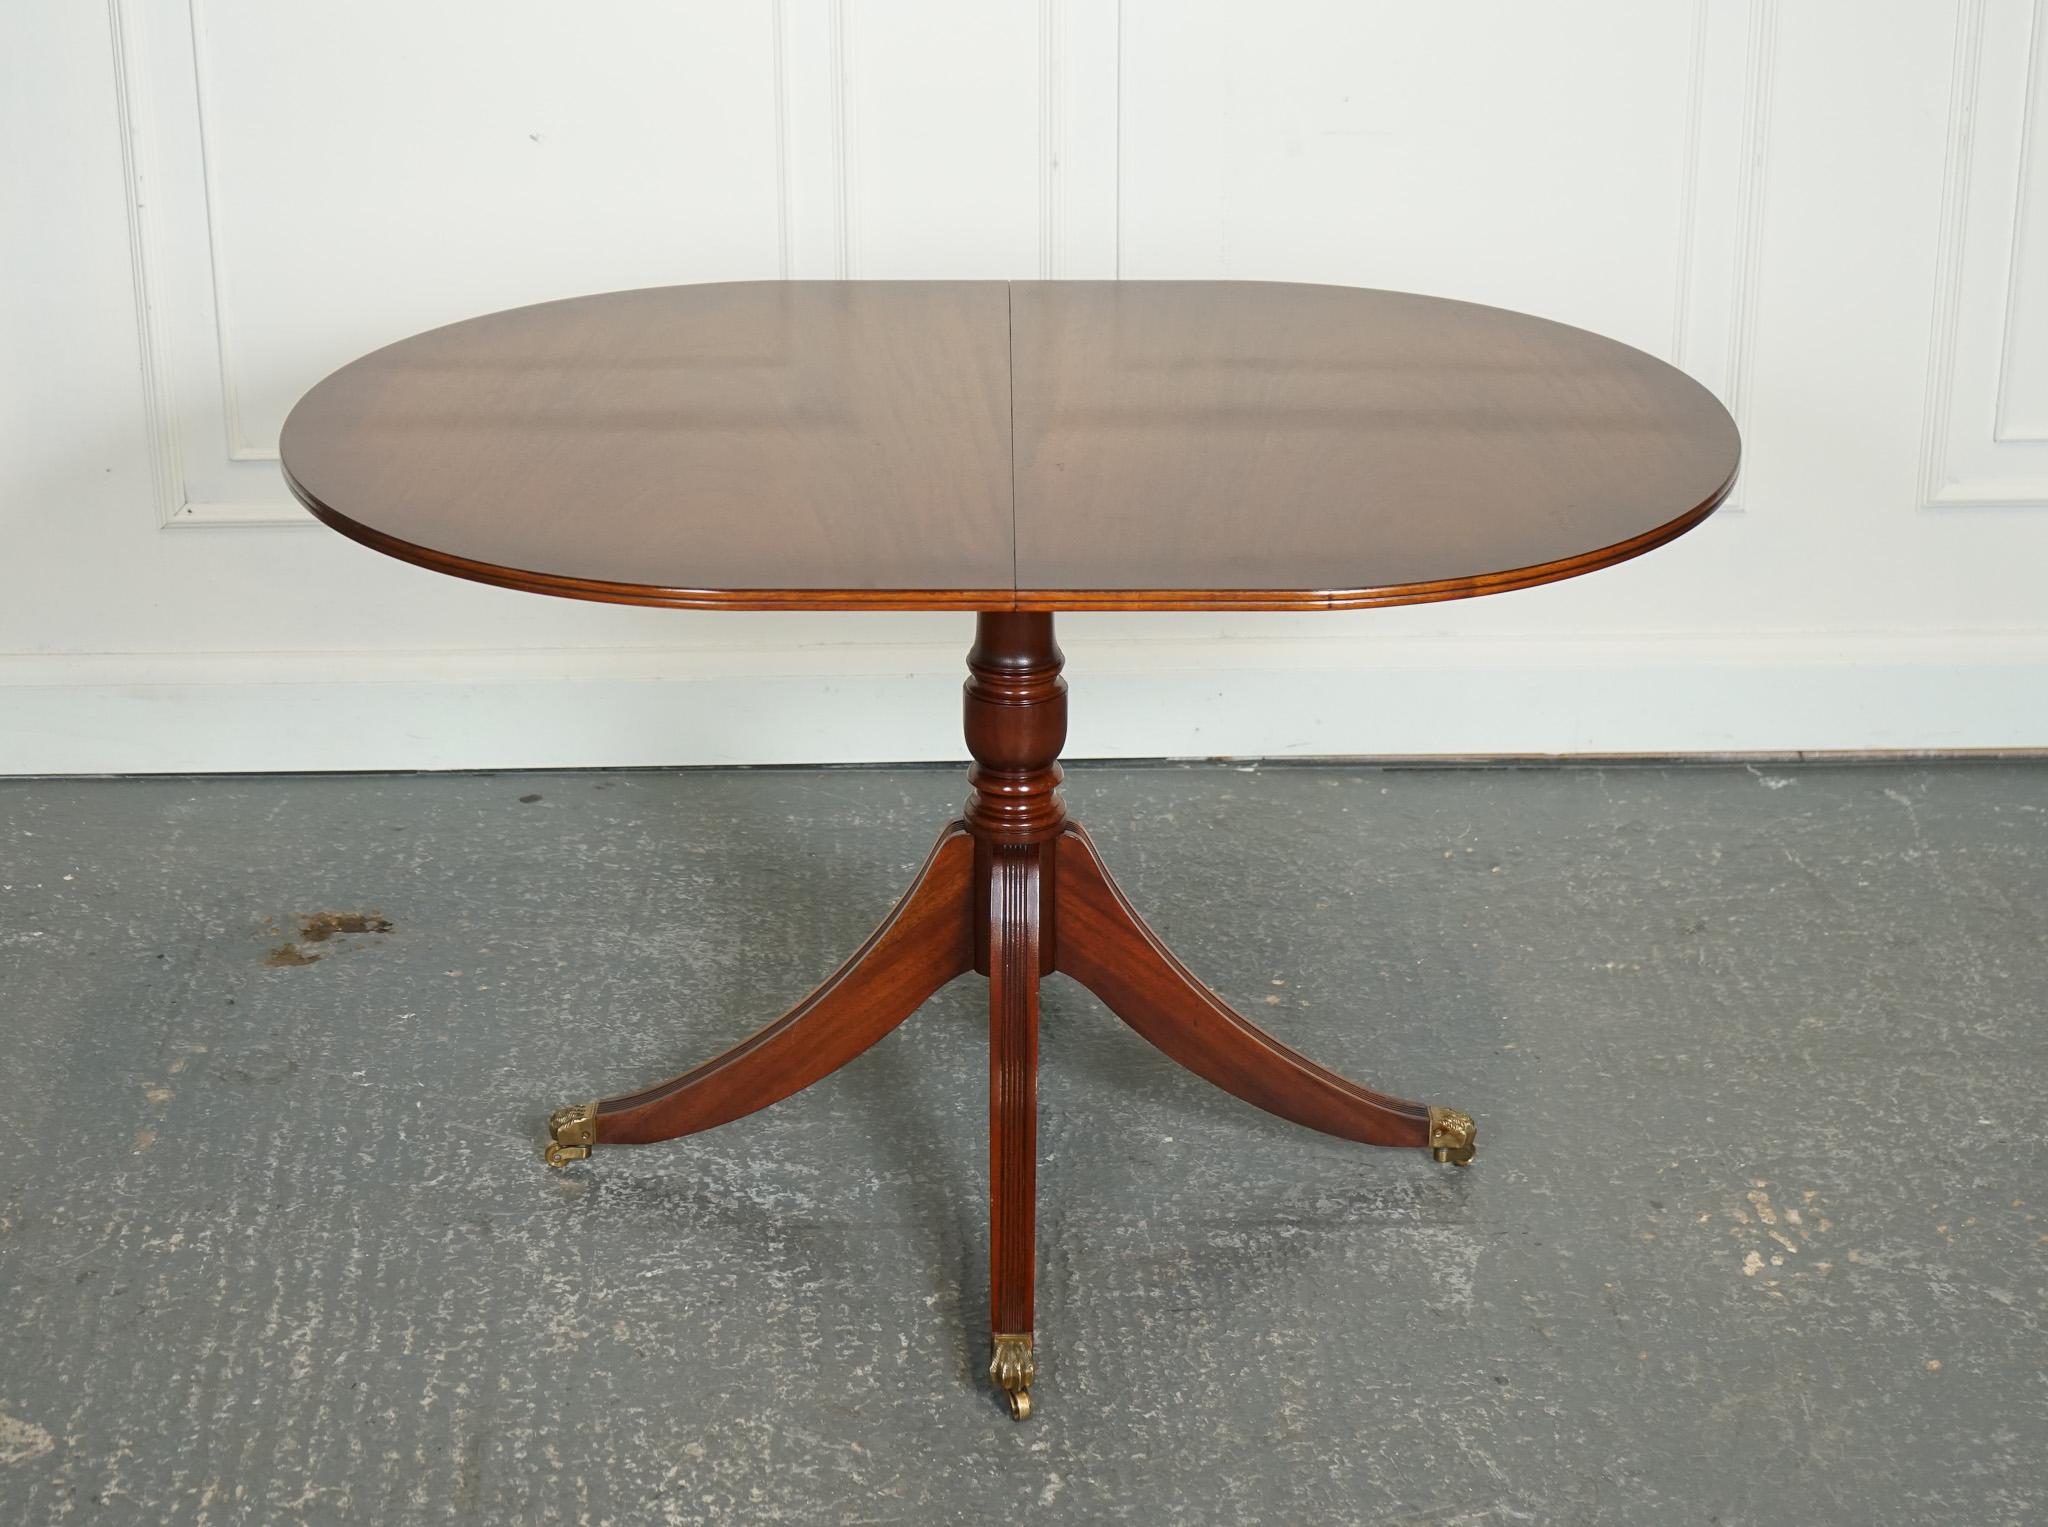 
We are delighted to offer for sale Vintage Extending Dining Table Raised On Castors.

The vintage extending dining table raised on castors is a versatile and practical piece of furniture that combines classic design with functionality. It features